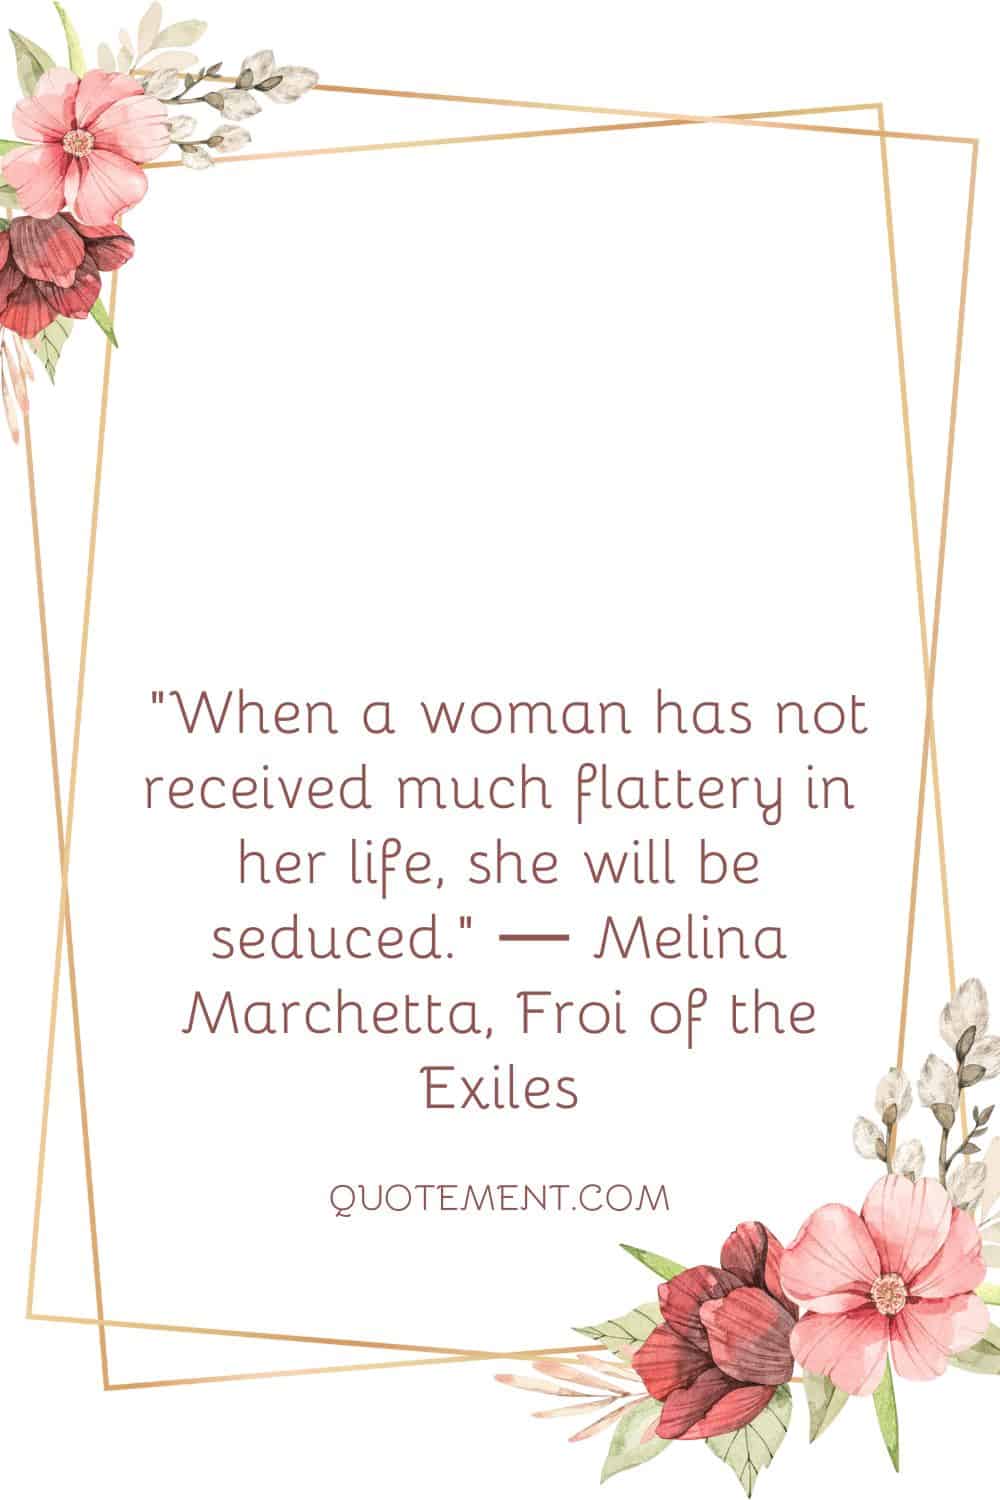 When a woman has not received much flattery in her life, she will be seduced